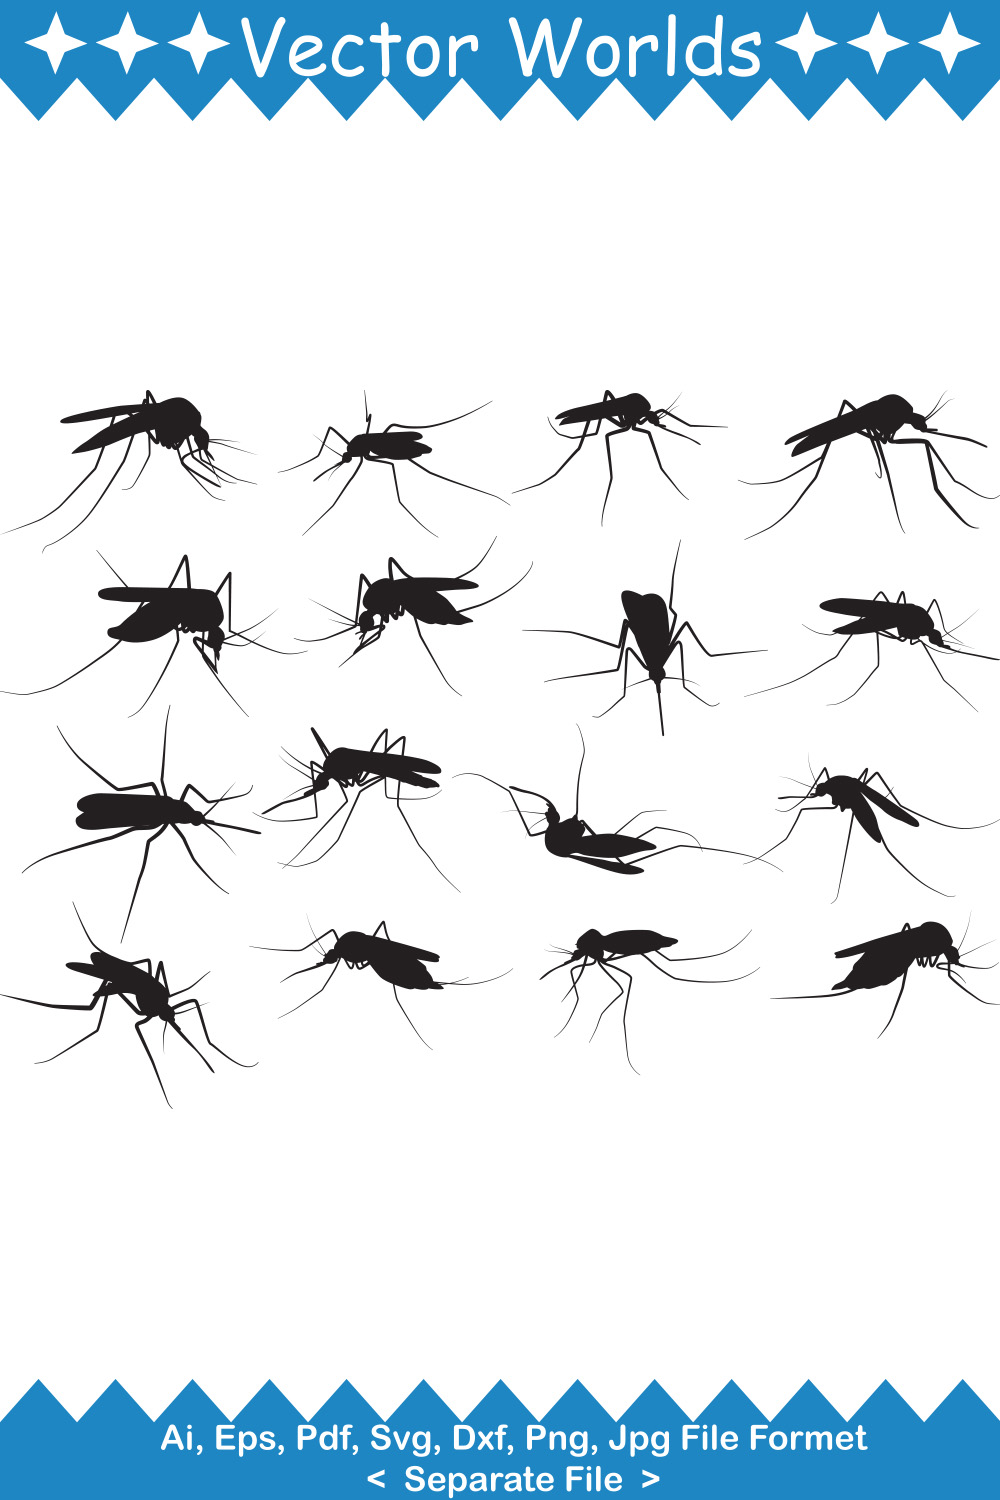 Group of mosquito silhouettes on a white background.